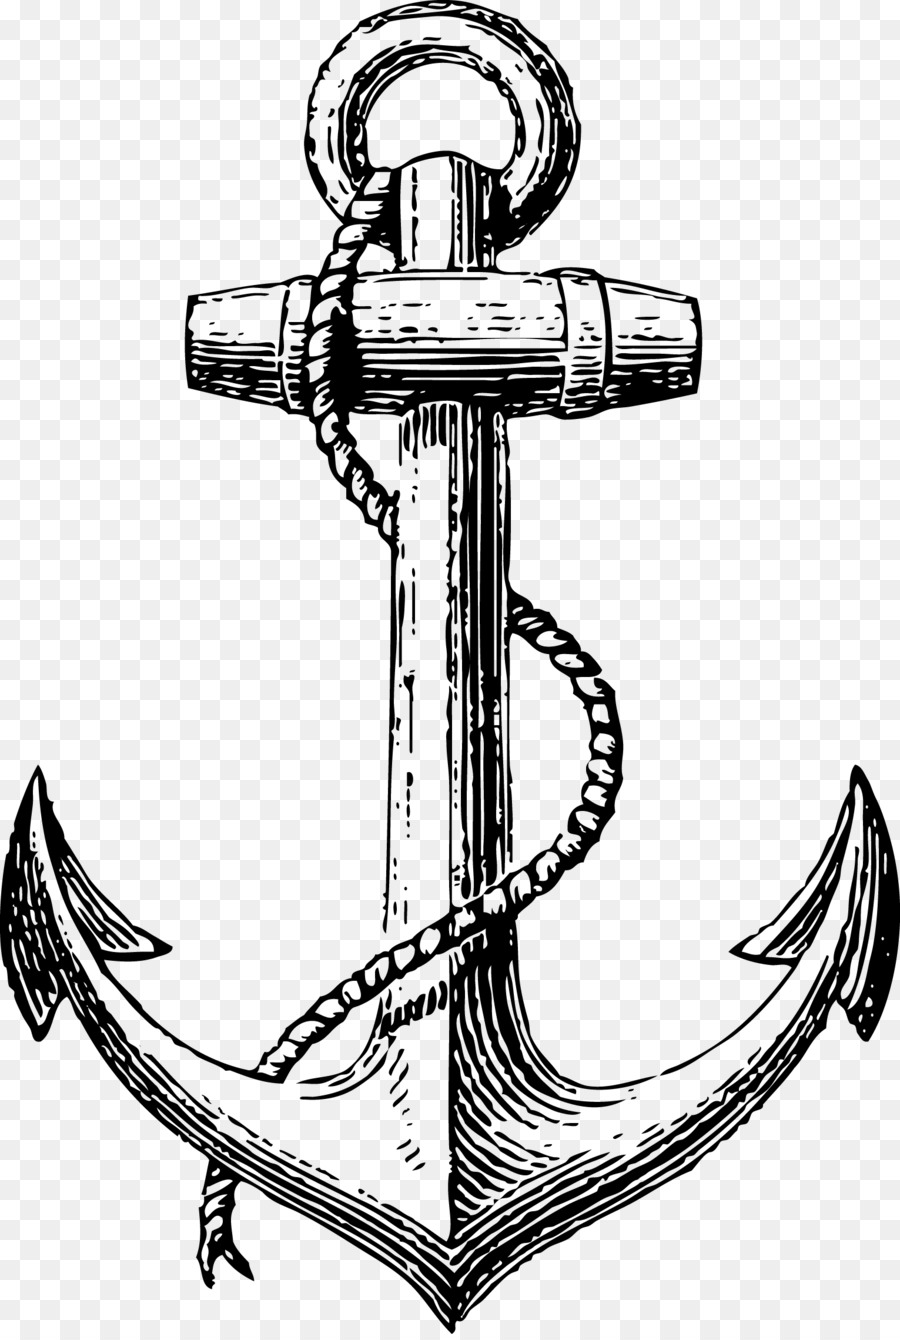 Anchor Drawing Clip art - Vector painted anchor png download - 1531*2270 - Free Transparent Anchor png Download.